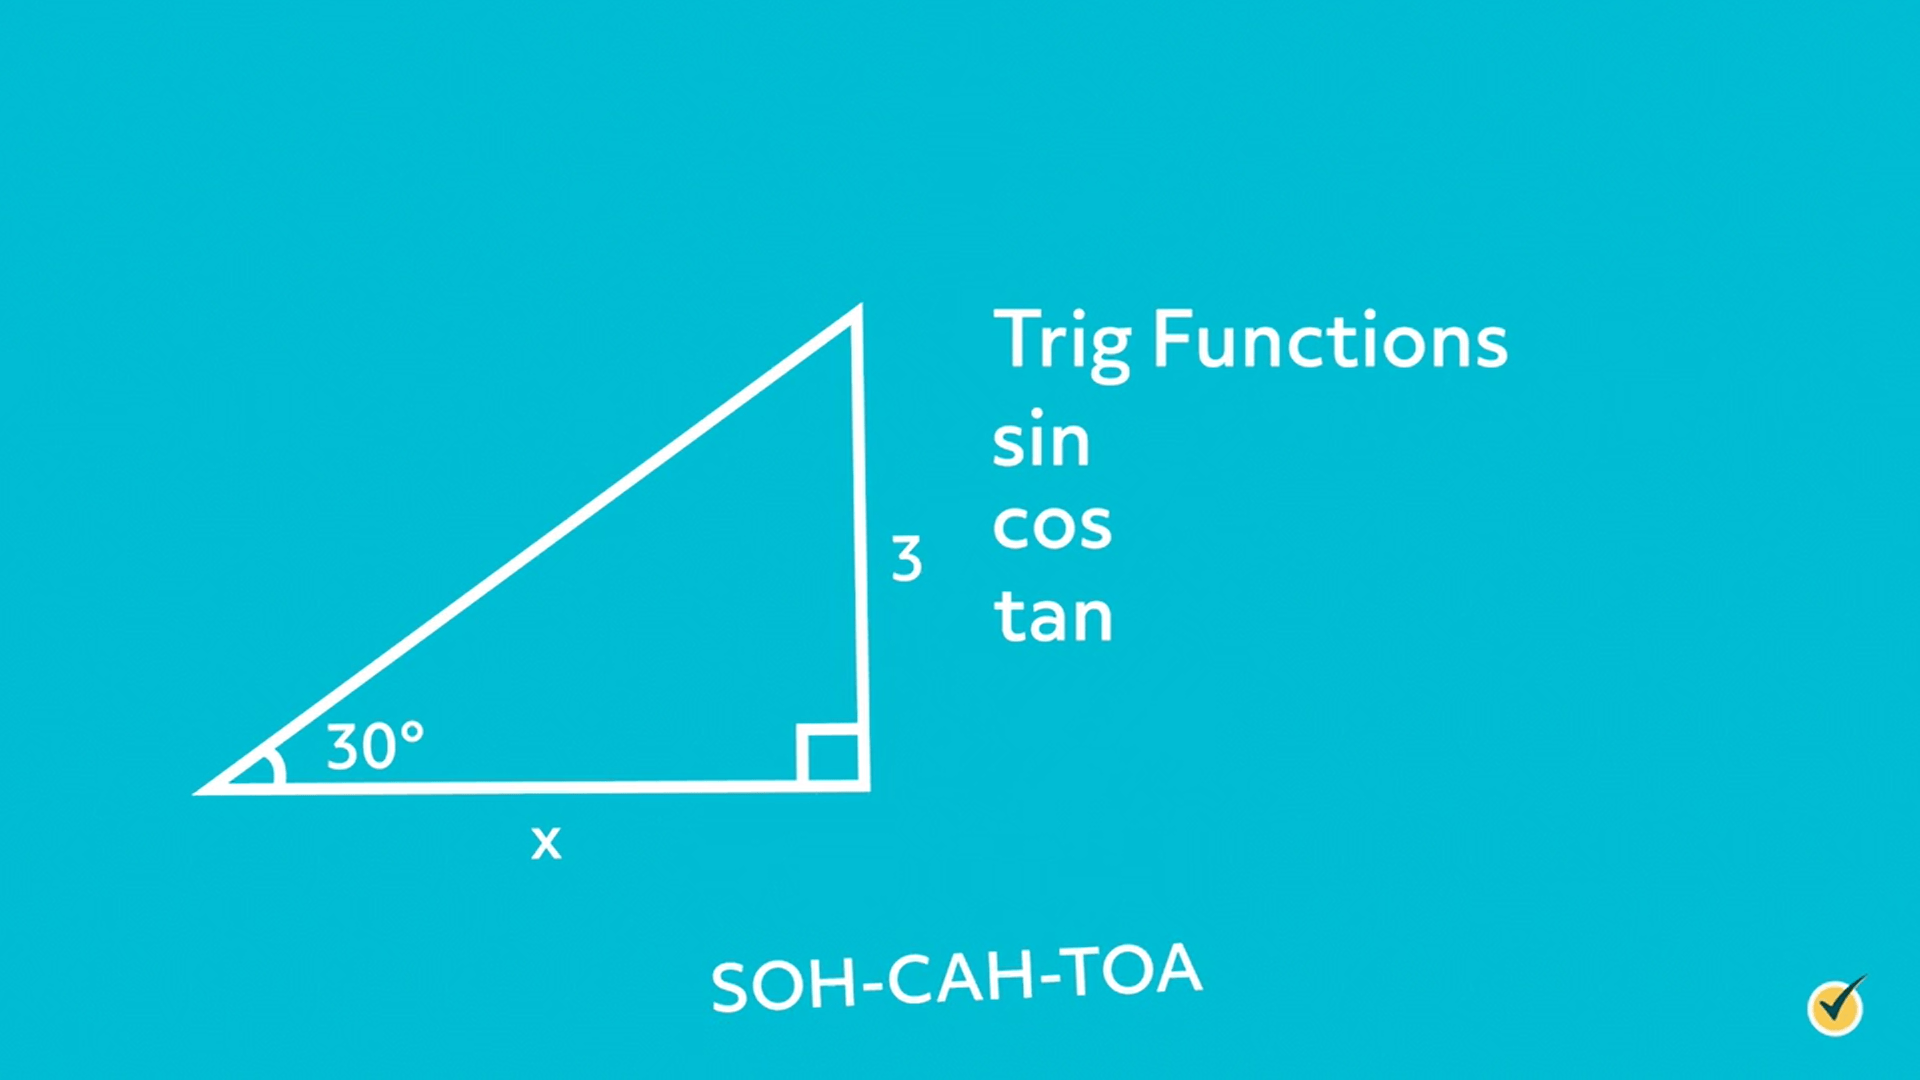 right triangle, bottom left angle 30 degrees, bottom right angle marked with a square, bottom side labeled "x", right side labeled 3, words on the right say "Trig Functions sin cos tan", bottom words say "SOH-CAH-TOA"